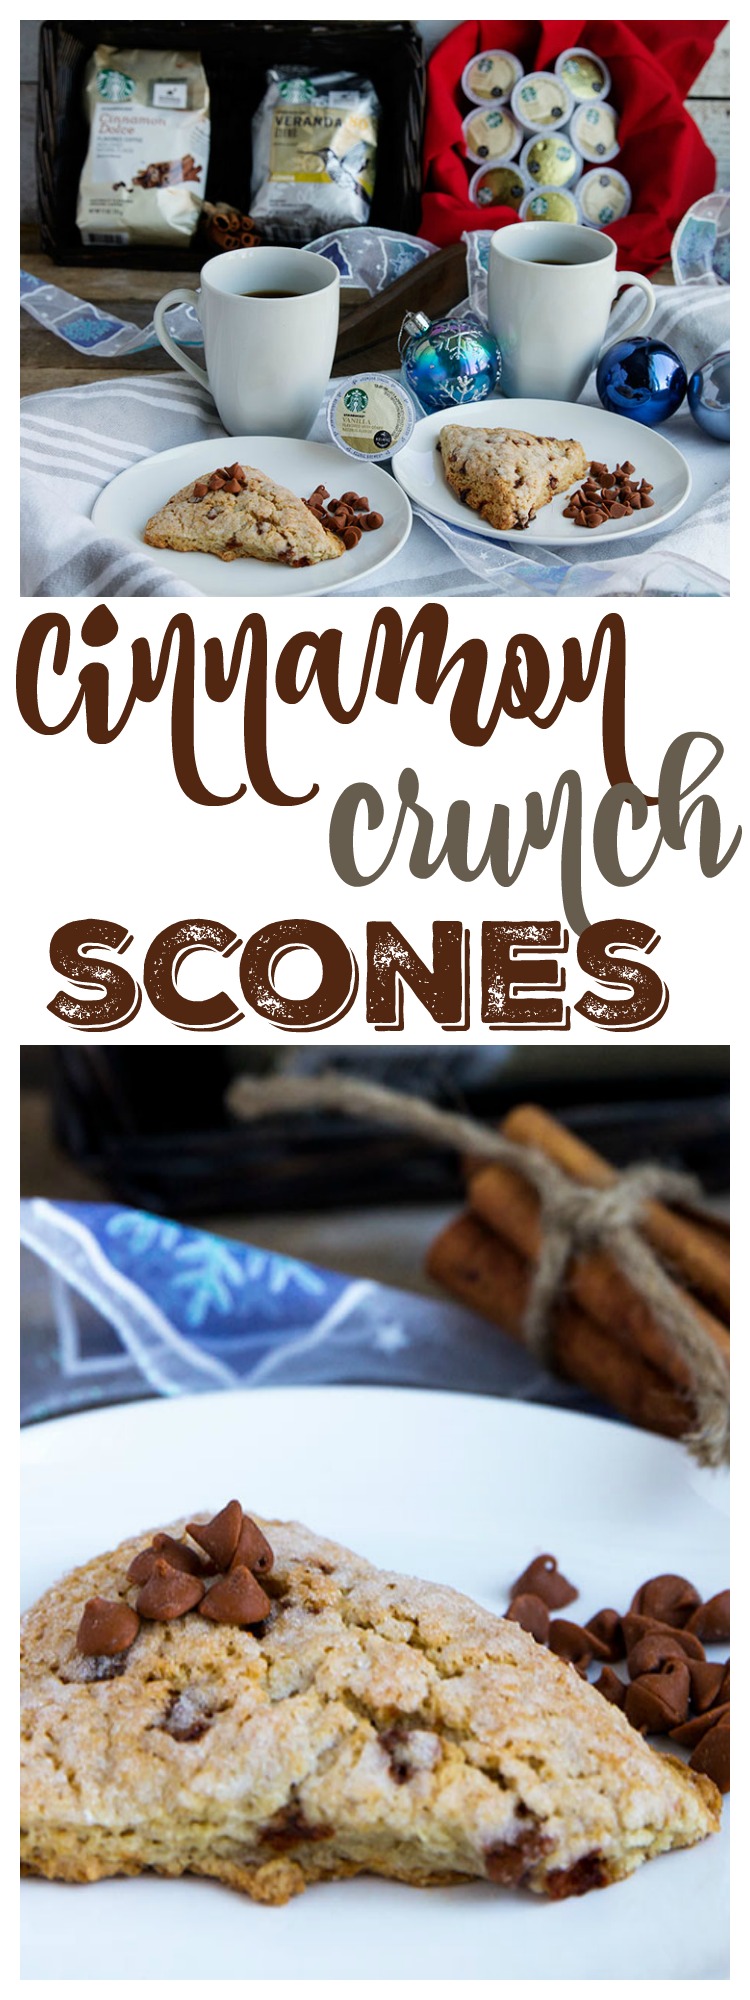 Cinnamon Crunch Scones - Soft and flavorful. The perfect quick breakfast! // Gather for Bread